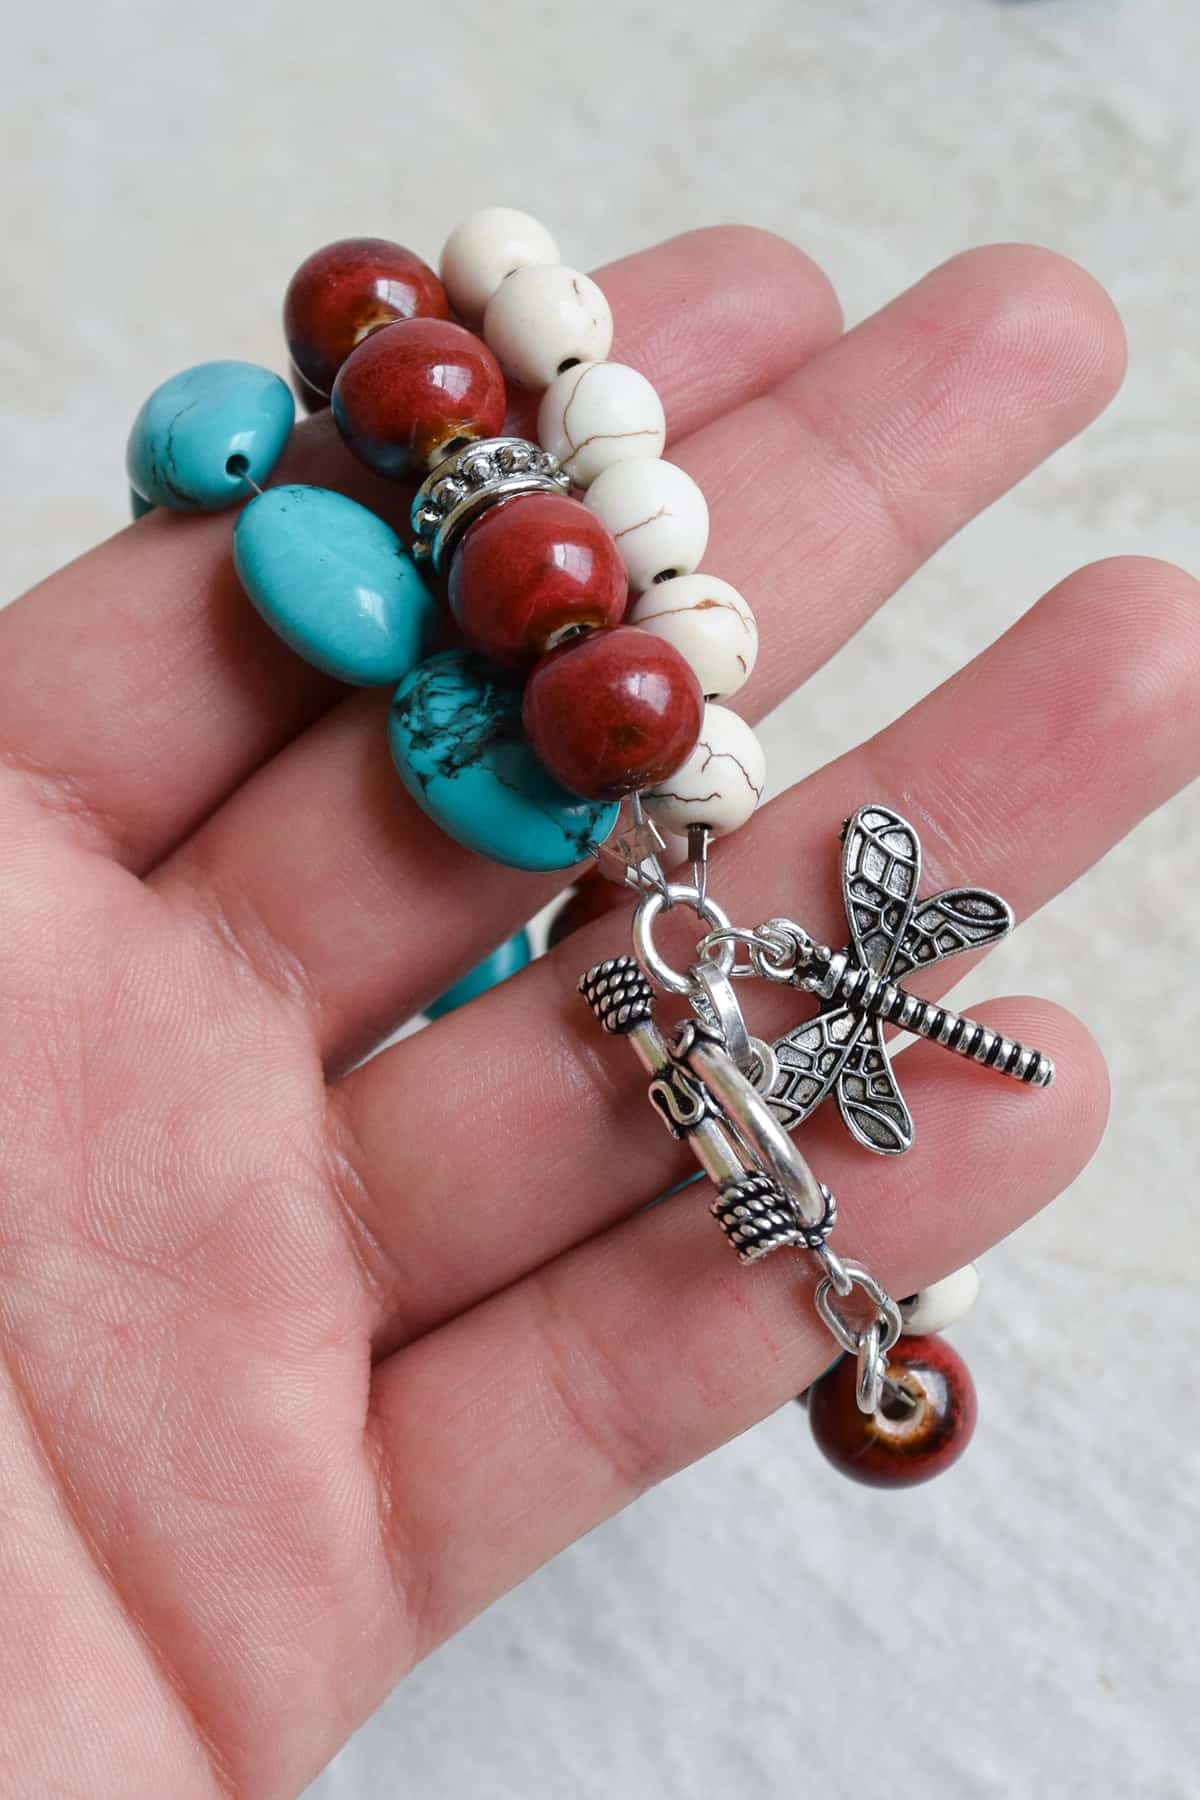 Inside f hand holding DIY beaded bracelet with red, white, and turquoise beads and firefly charm. 